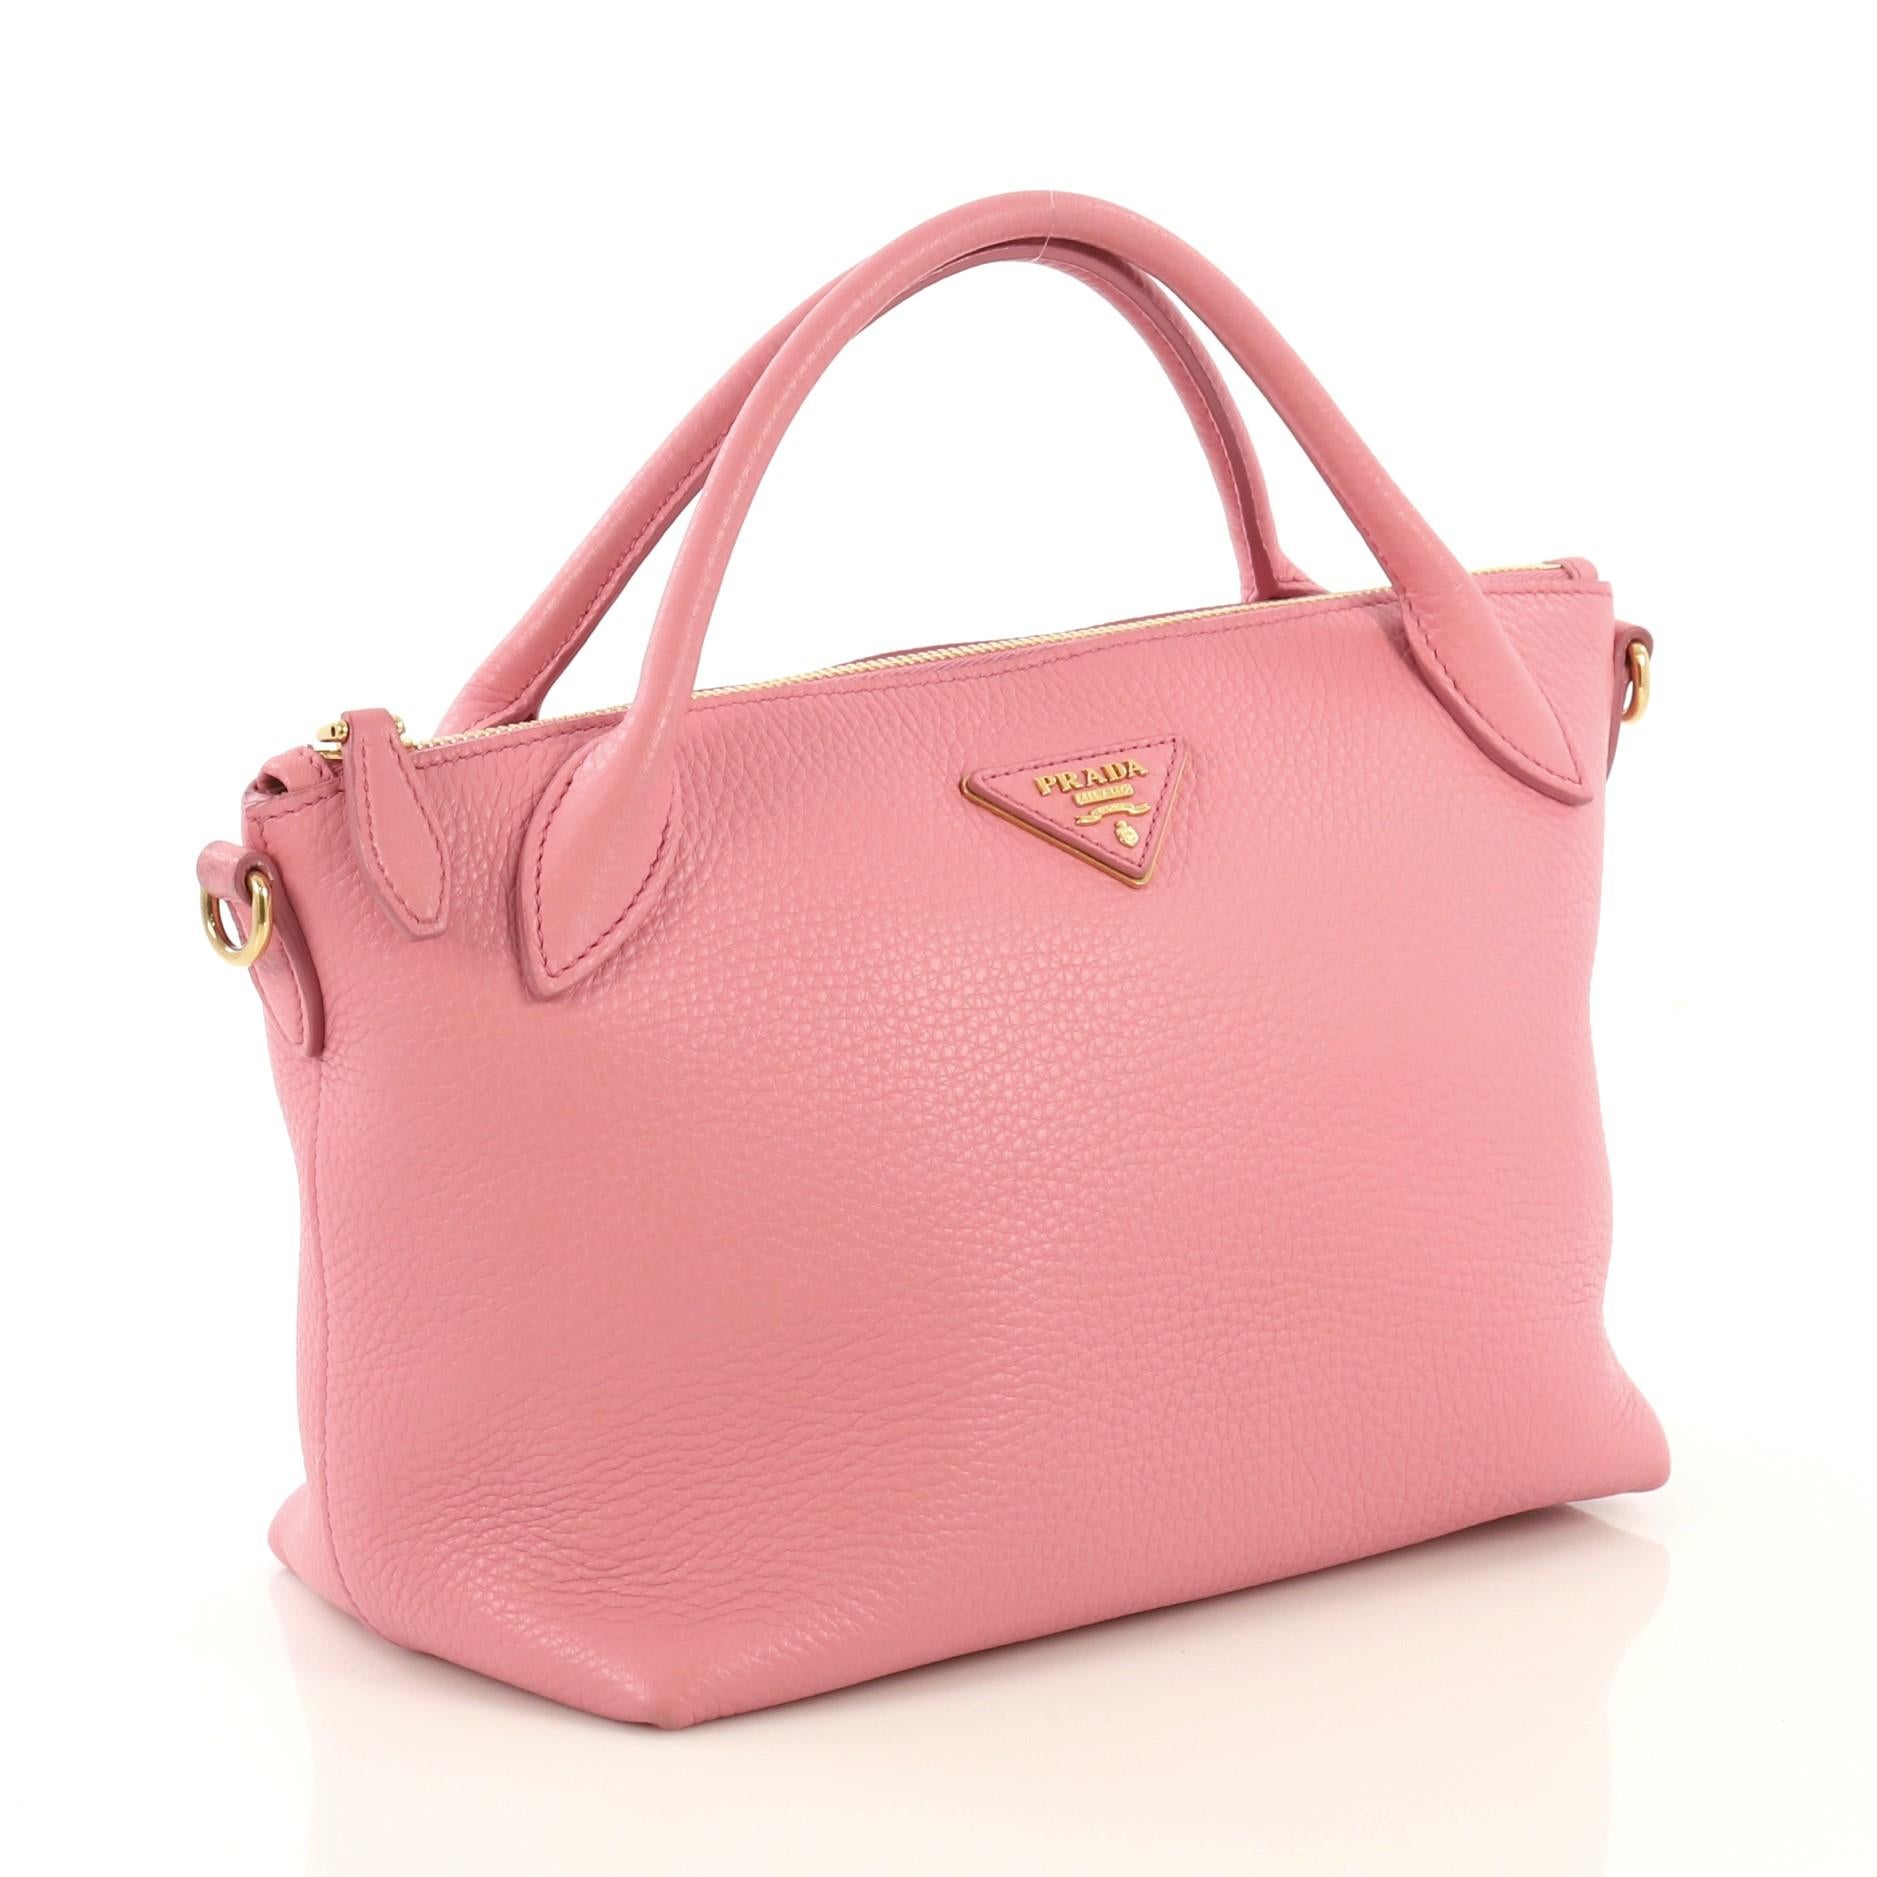 This Prada Convertible Top Handle Satchel Vitello Daino Small, crafted from pink vitello daino leather, features dual rolled leather handles, Prada Milano logo, and gold-tone hardware. Its top zip closure opens to a pink fabric and leather interior